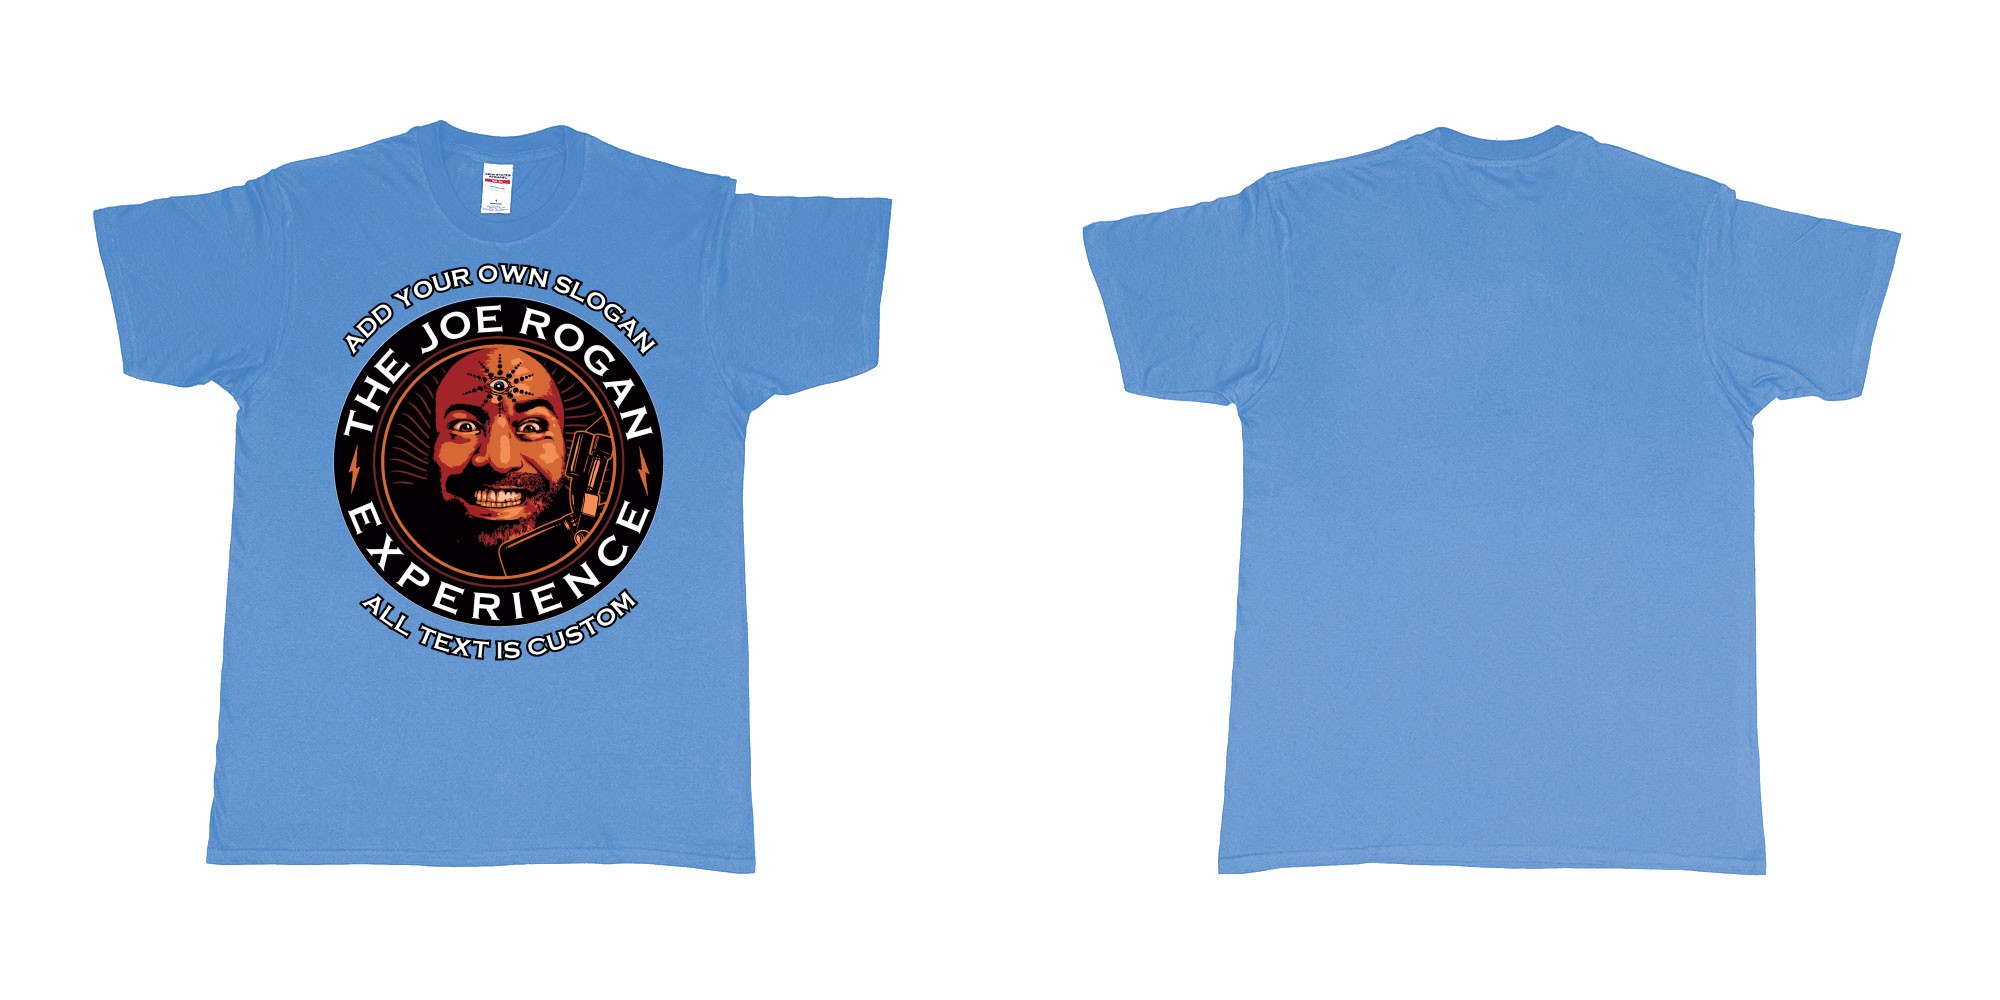 Custom tshirt design the joe rogan experience custom tshirt in fabric color carolina-blue choice your own text made in Bali by The Pirate Way